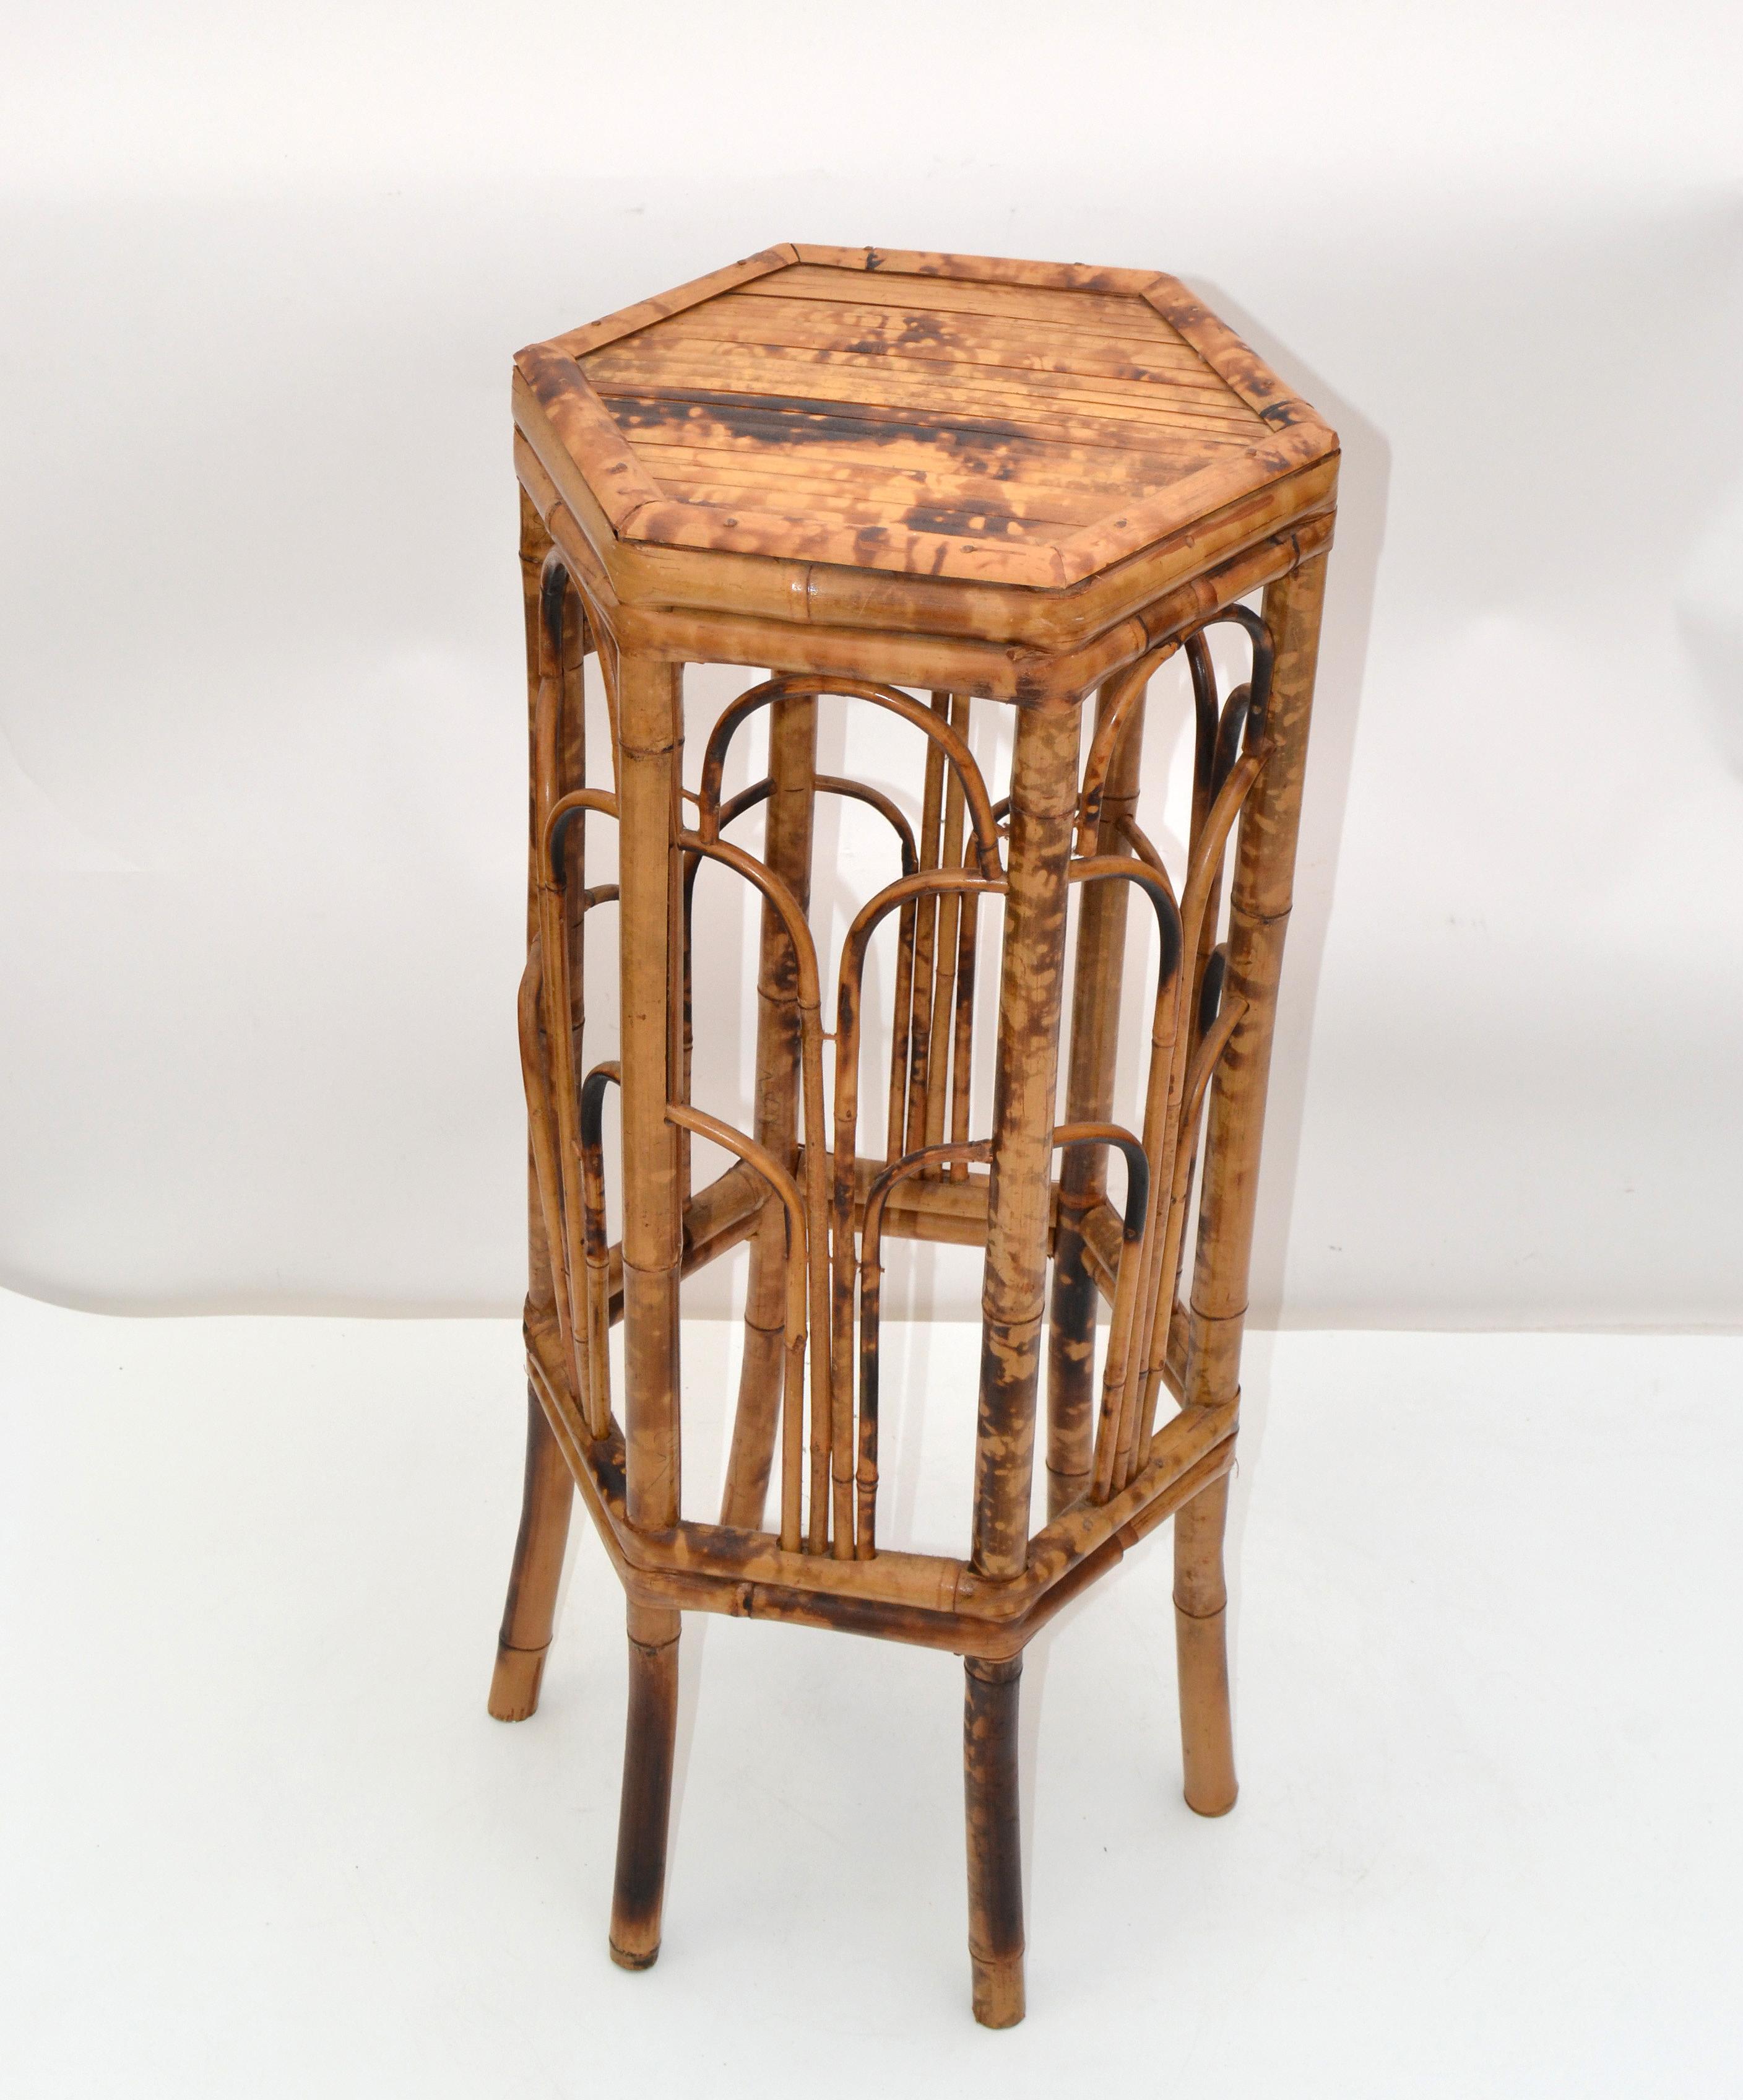 Vintage chinoiserie octagonal shaped bamboo and rattan side table on six legs. 
This table, plant stand is handcrafted with a cane top and features a bamboo frame and Chinese inspired bamboo patterns.
This is a beautiful addition for your